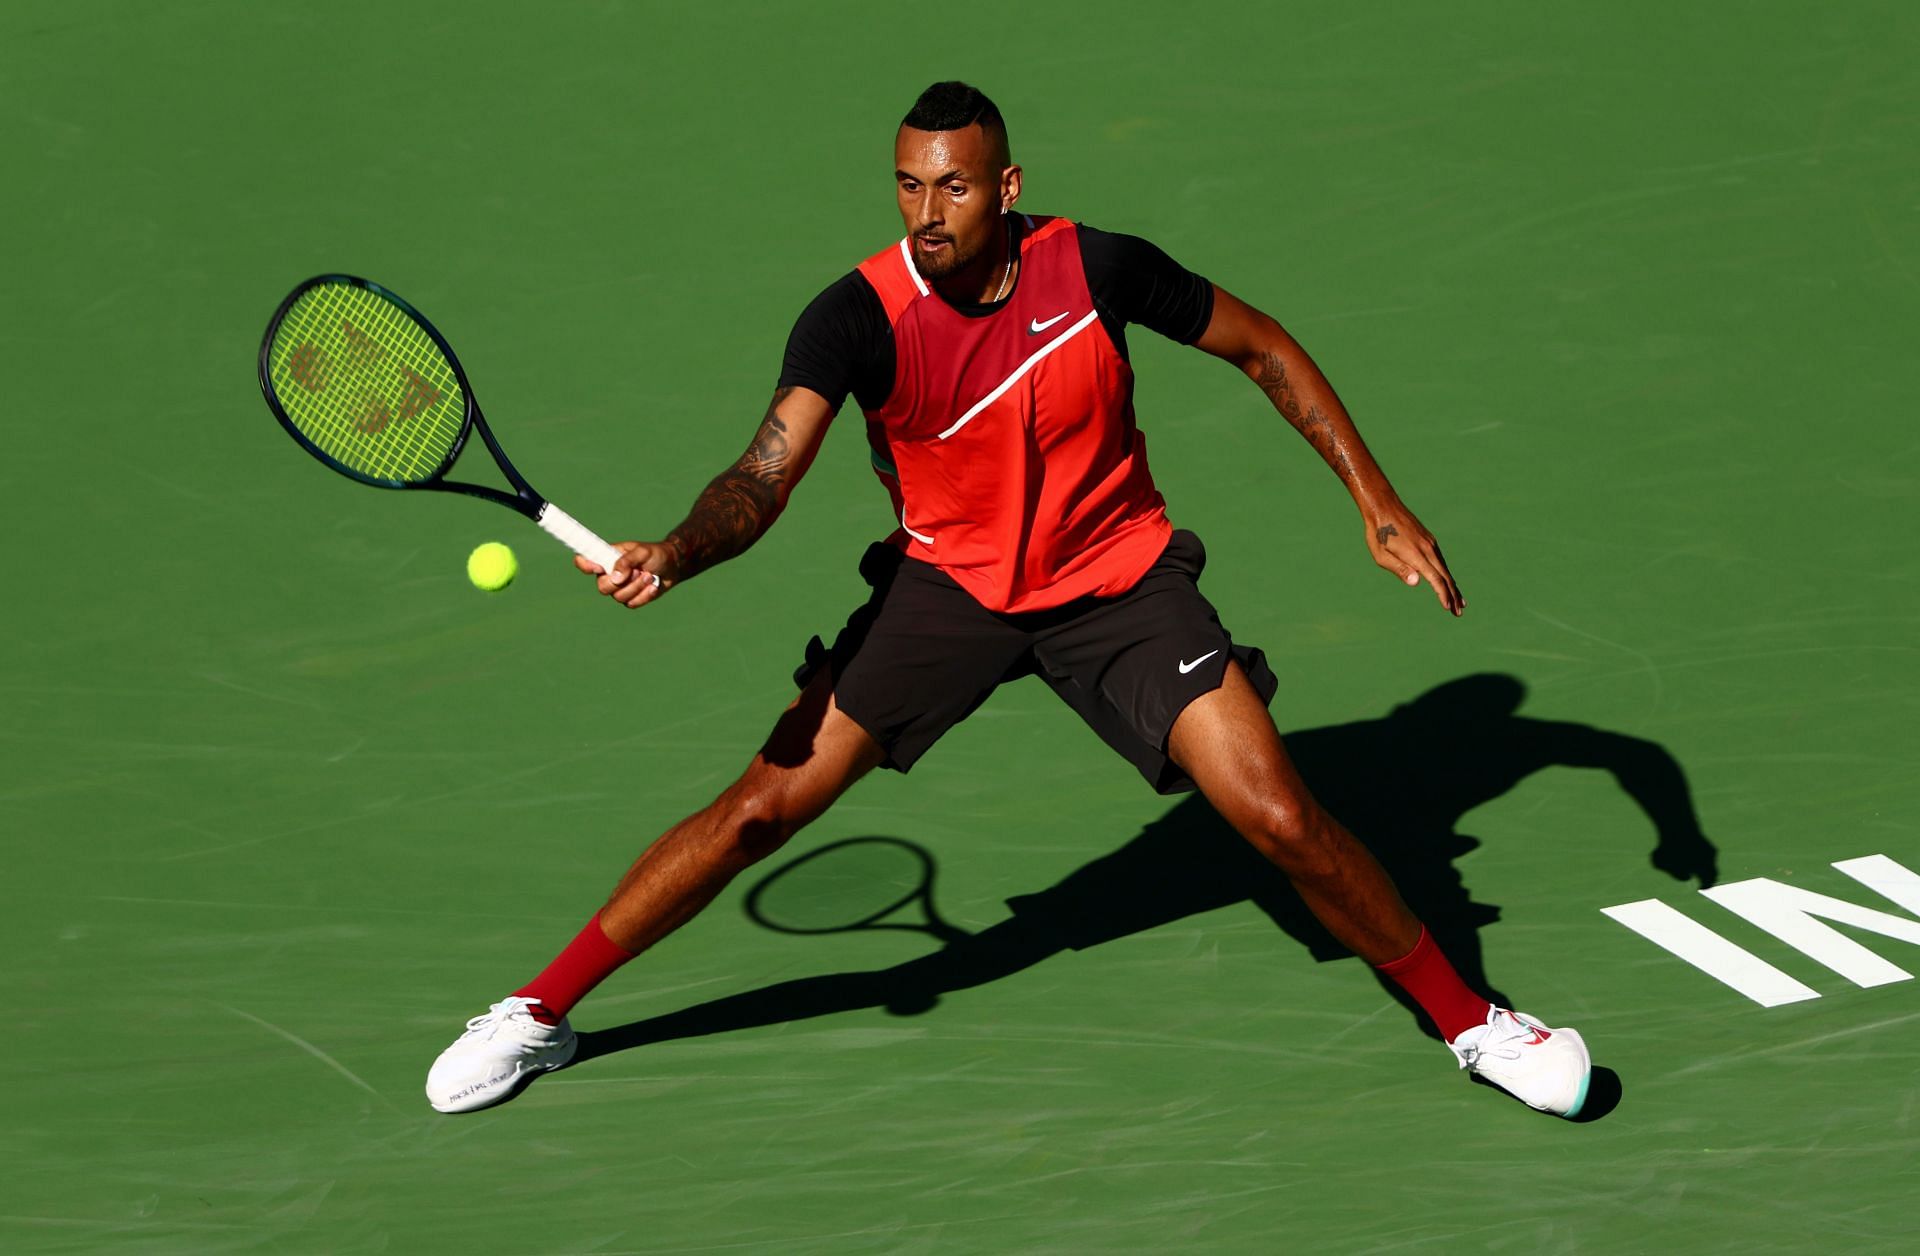 Nick Kyrgios also had his merry band of loyalists who rallied to his support